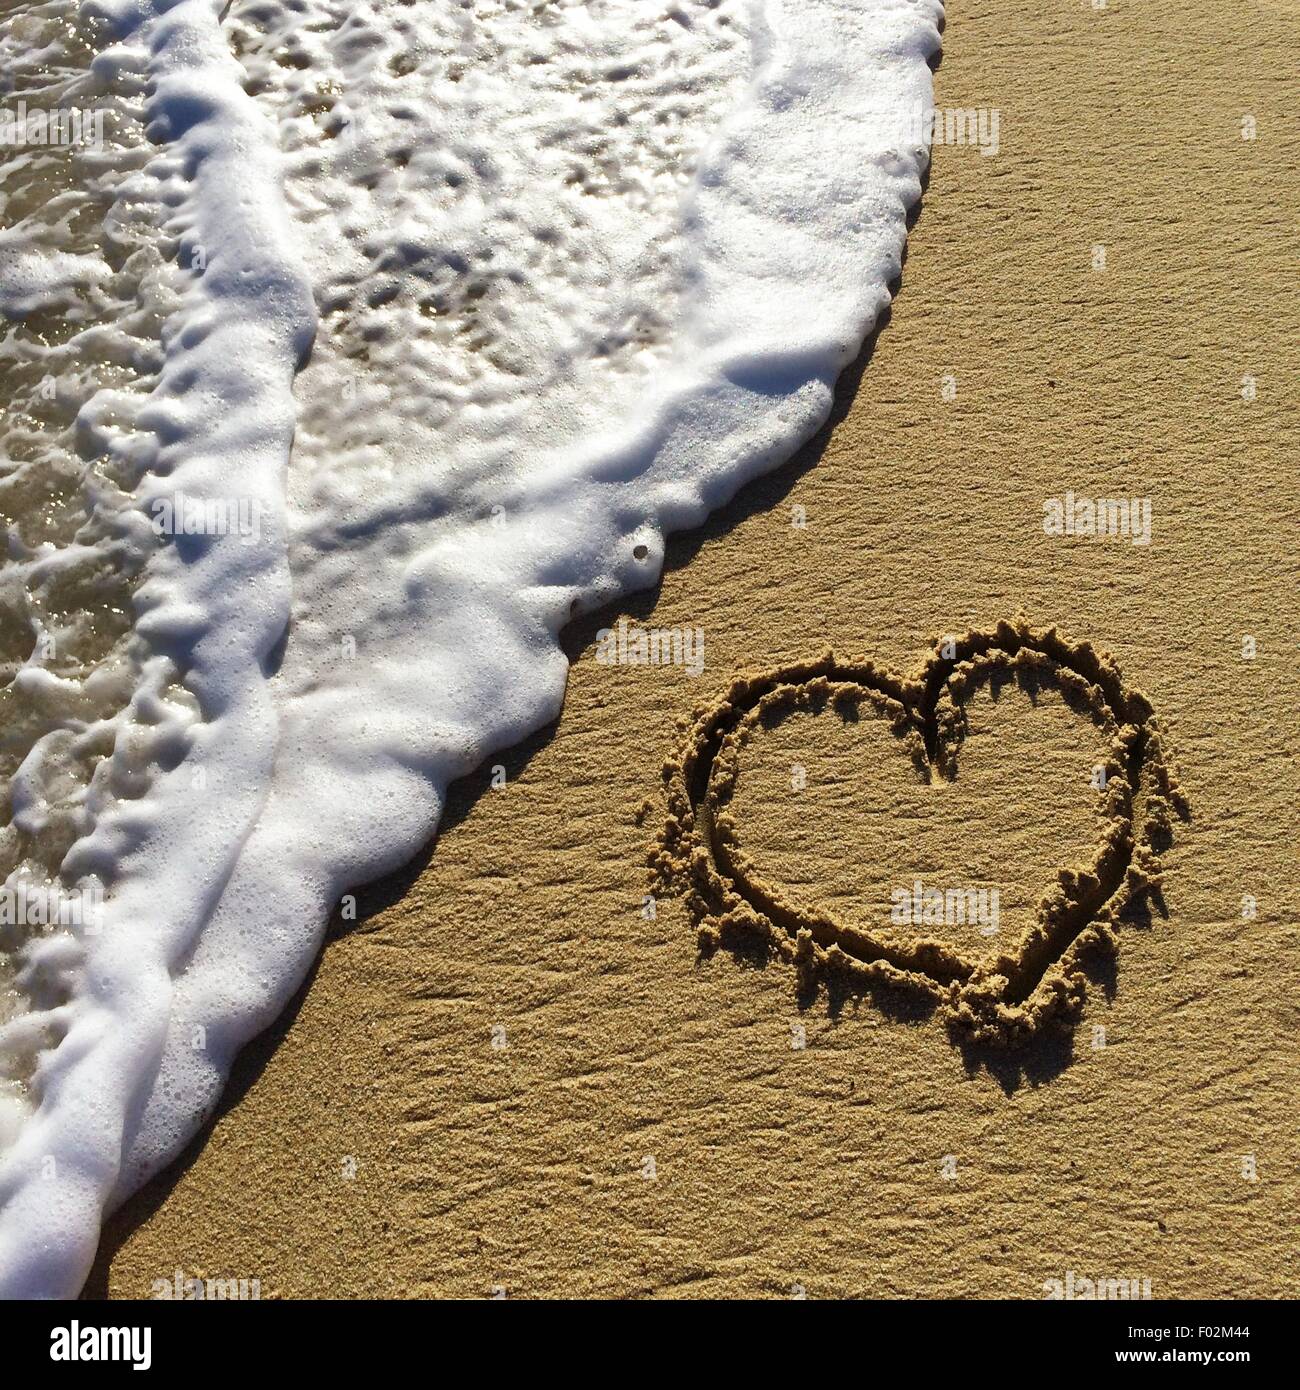 Heart shape drawn in the sand on a beach Stock Photo